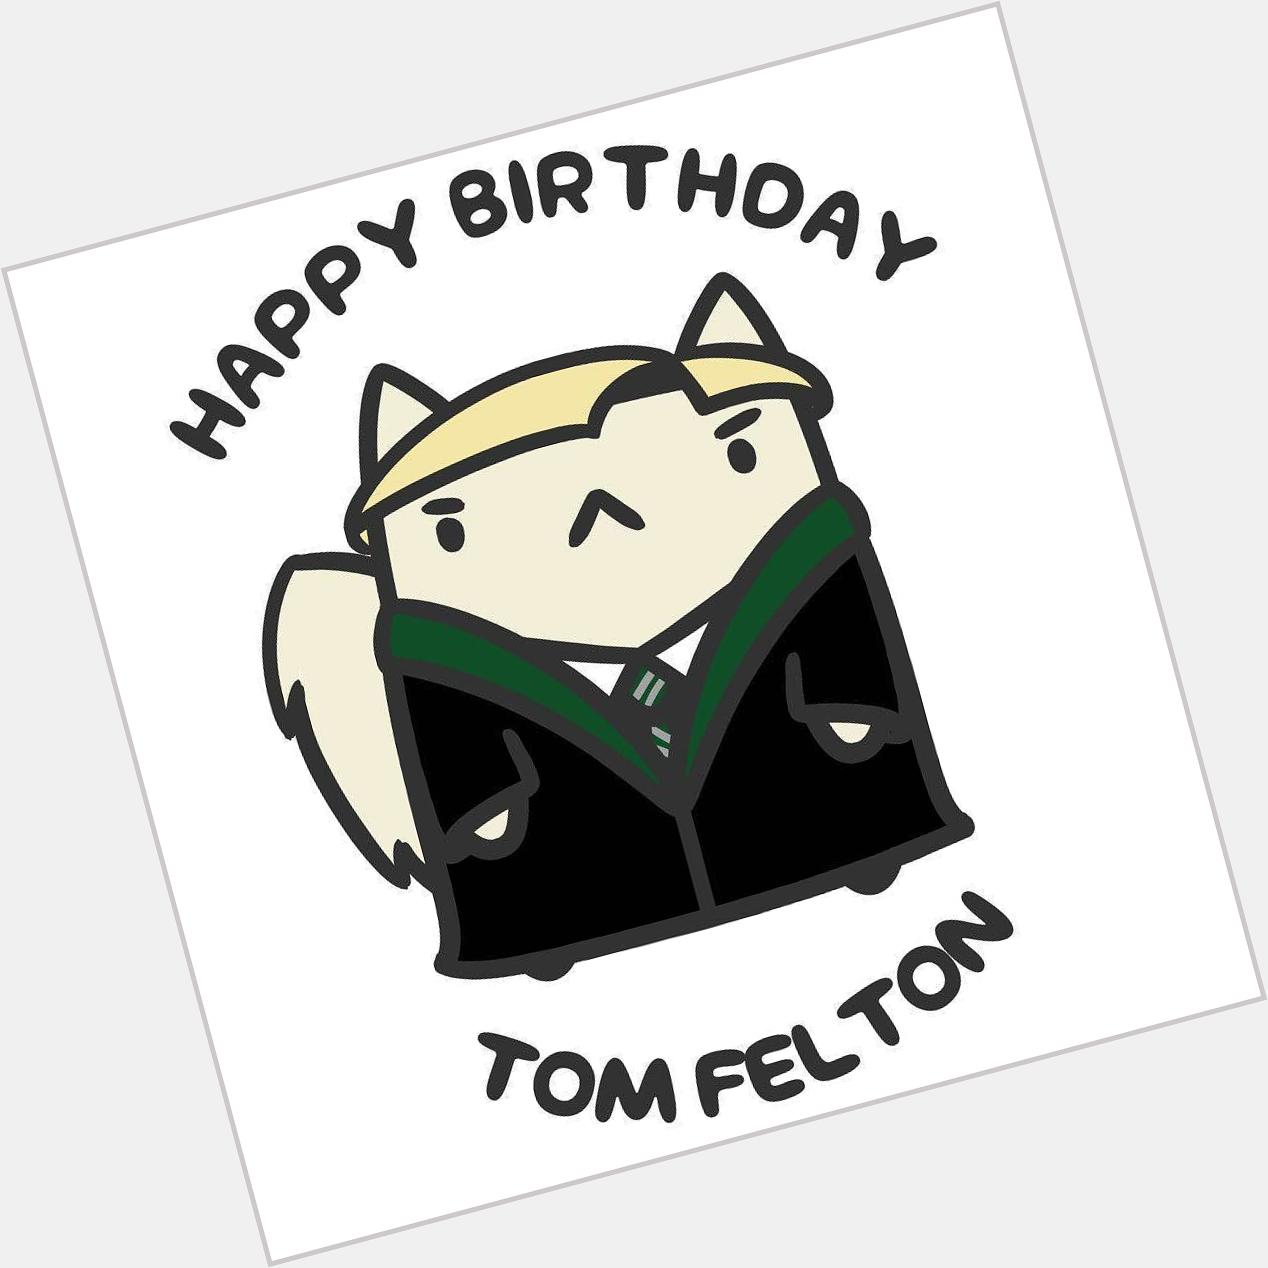 Happy Birthday, Tom Felton! Sorry Slytherins...I\m a Gryffindor for life! (Pottermore told 